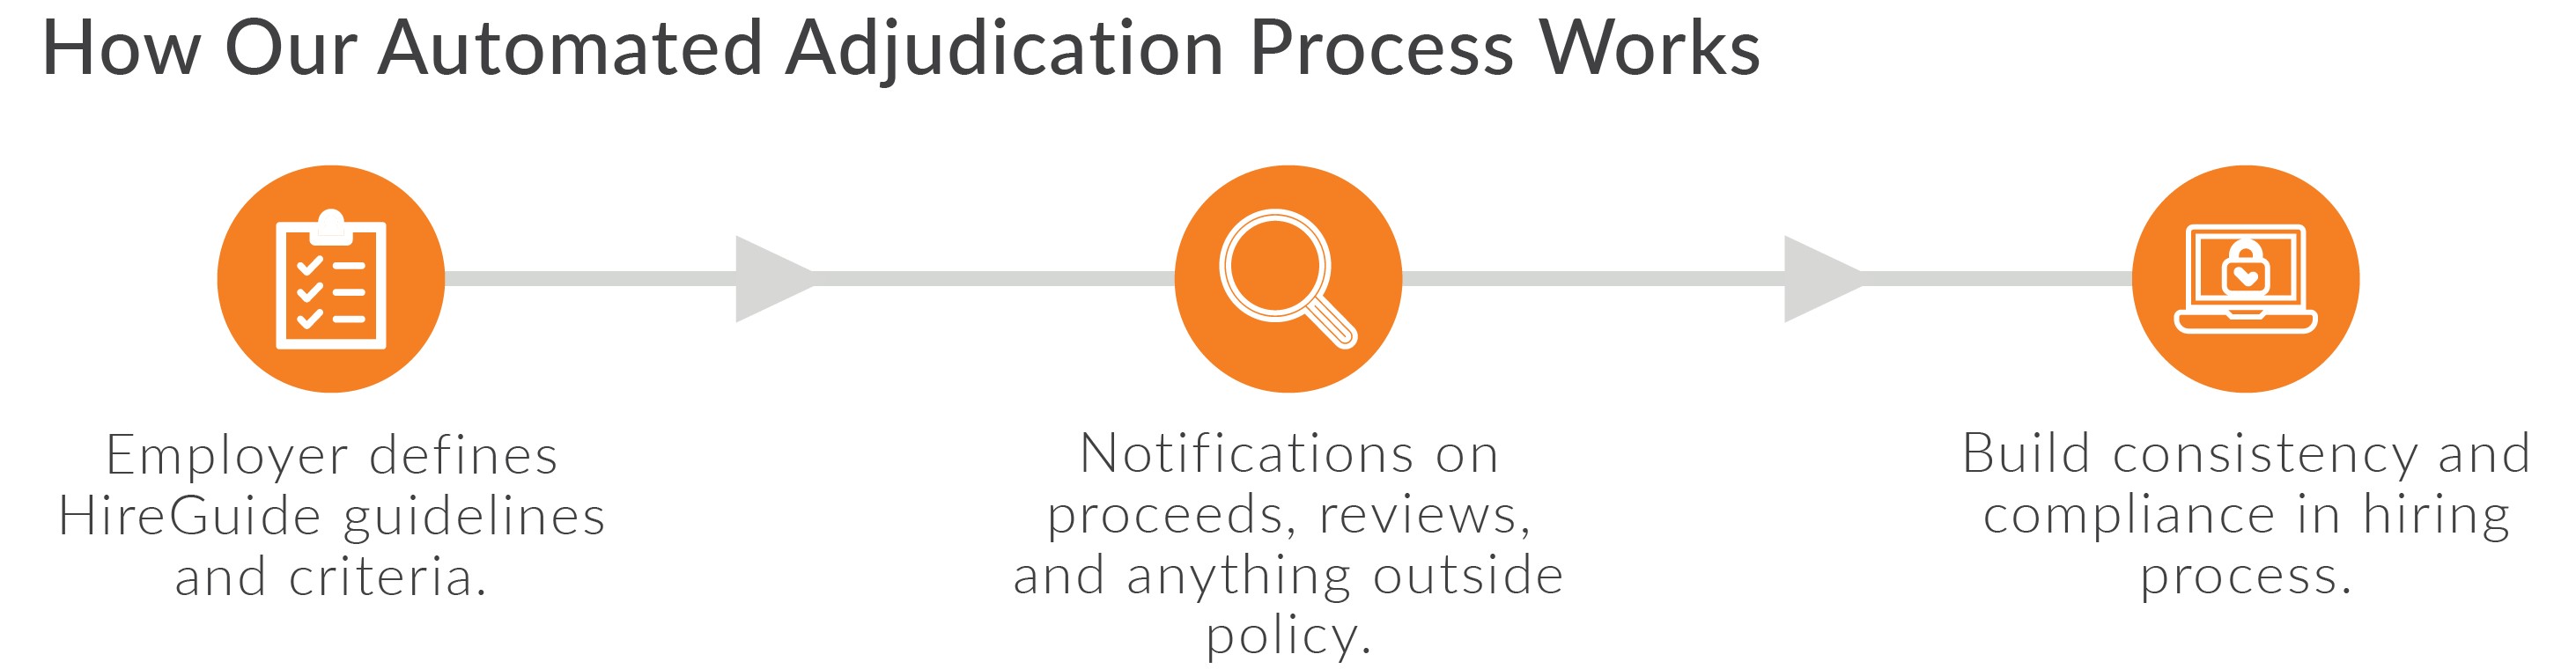 Using Automation In The Adjudication Process Saves Time And Money